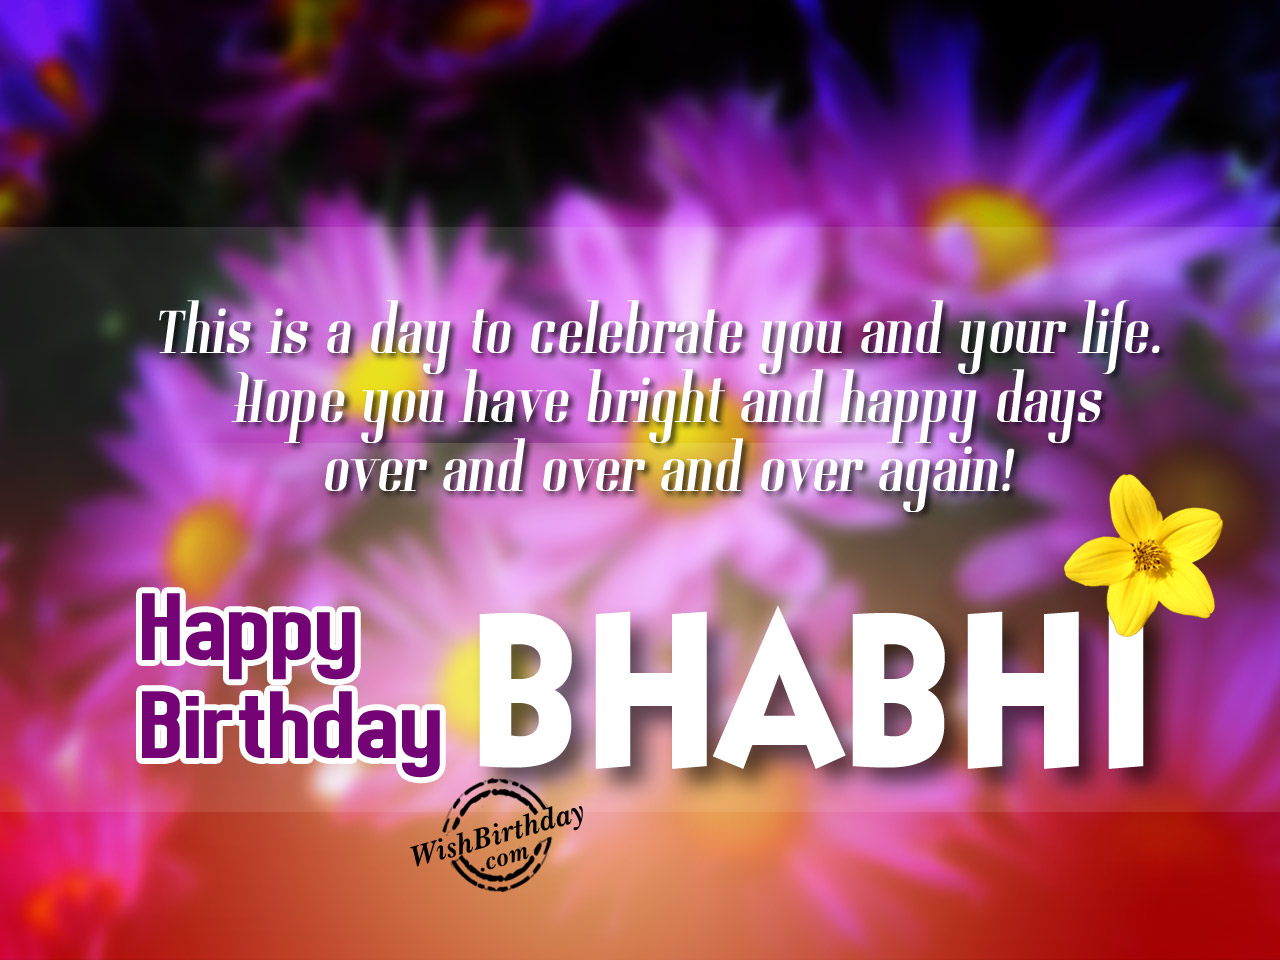 This is day to celebrate your day, Happy Birthday Bhabhi ...